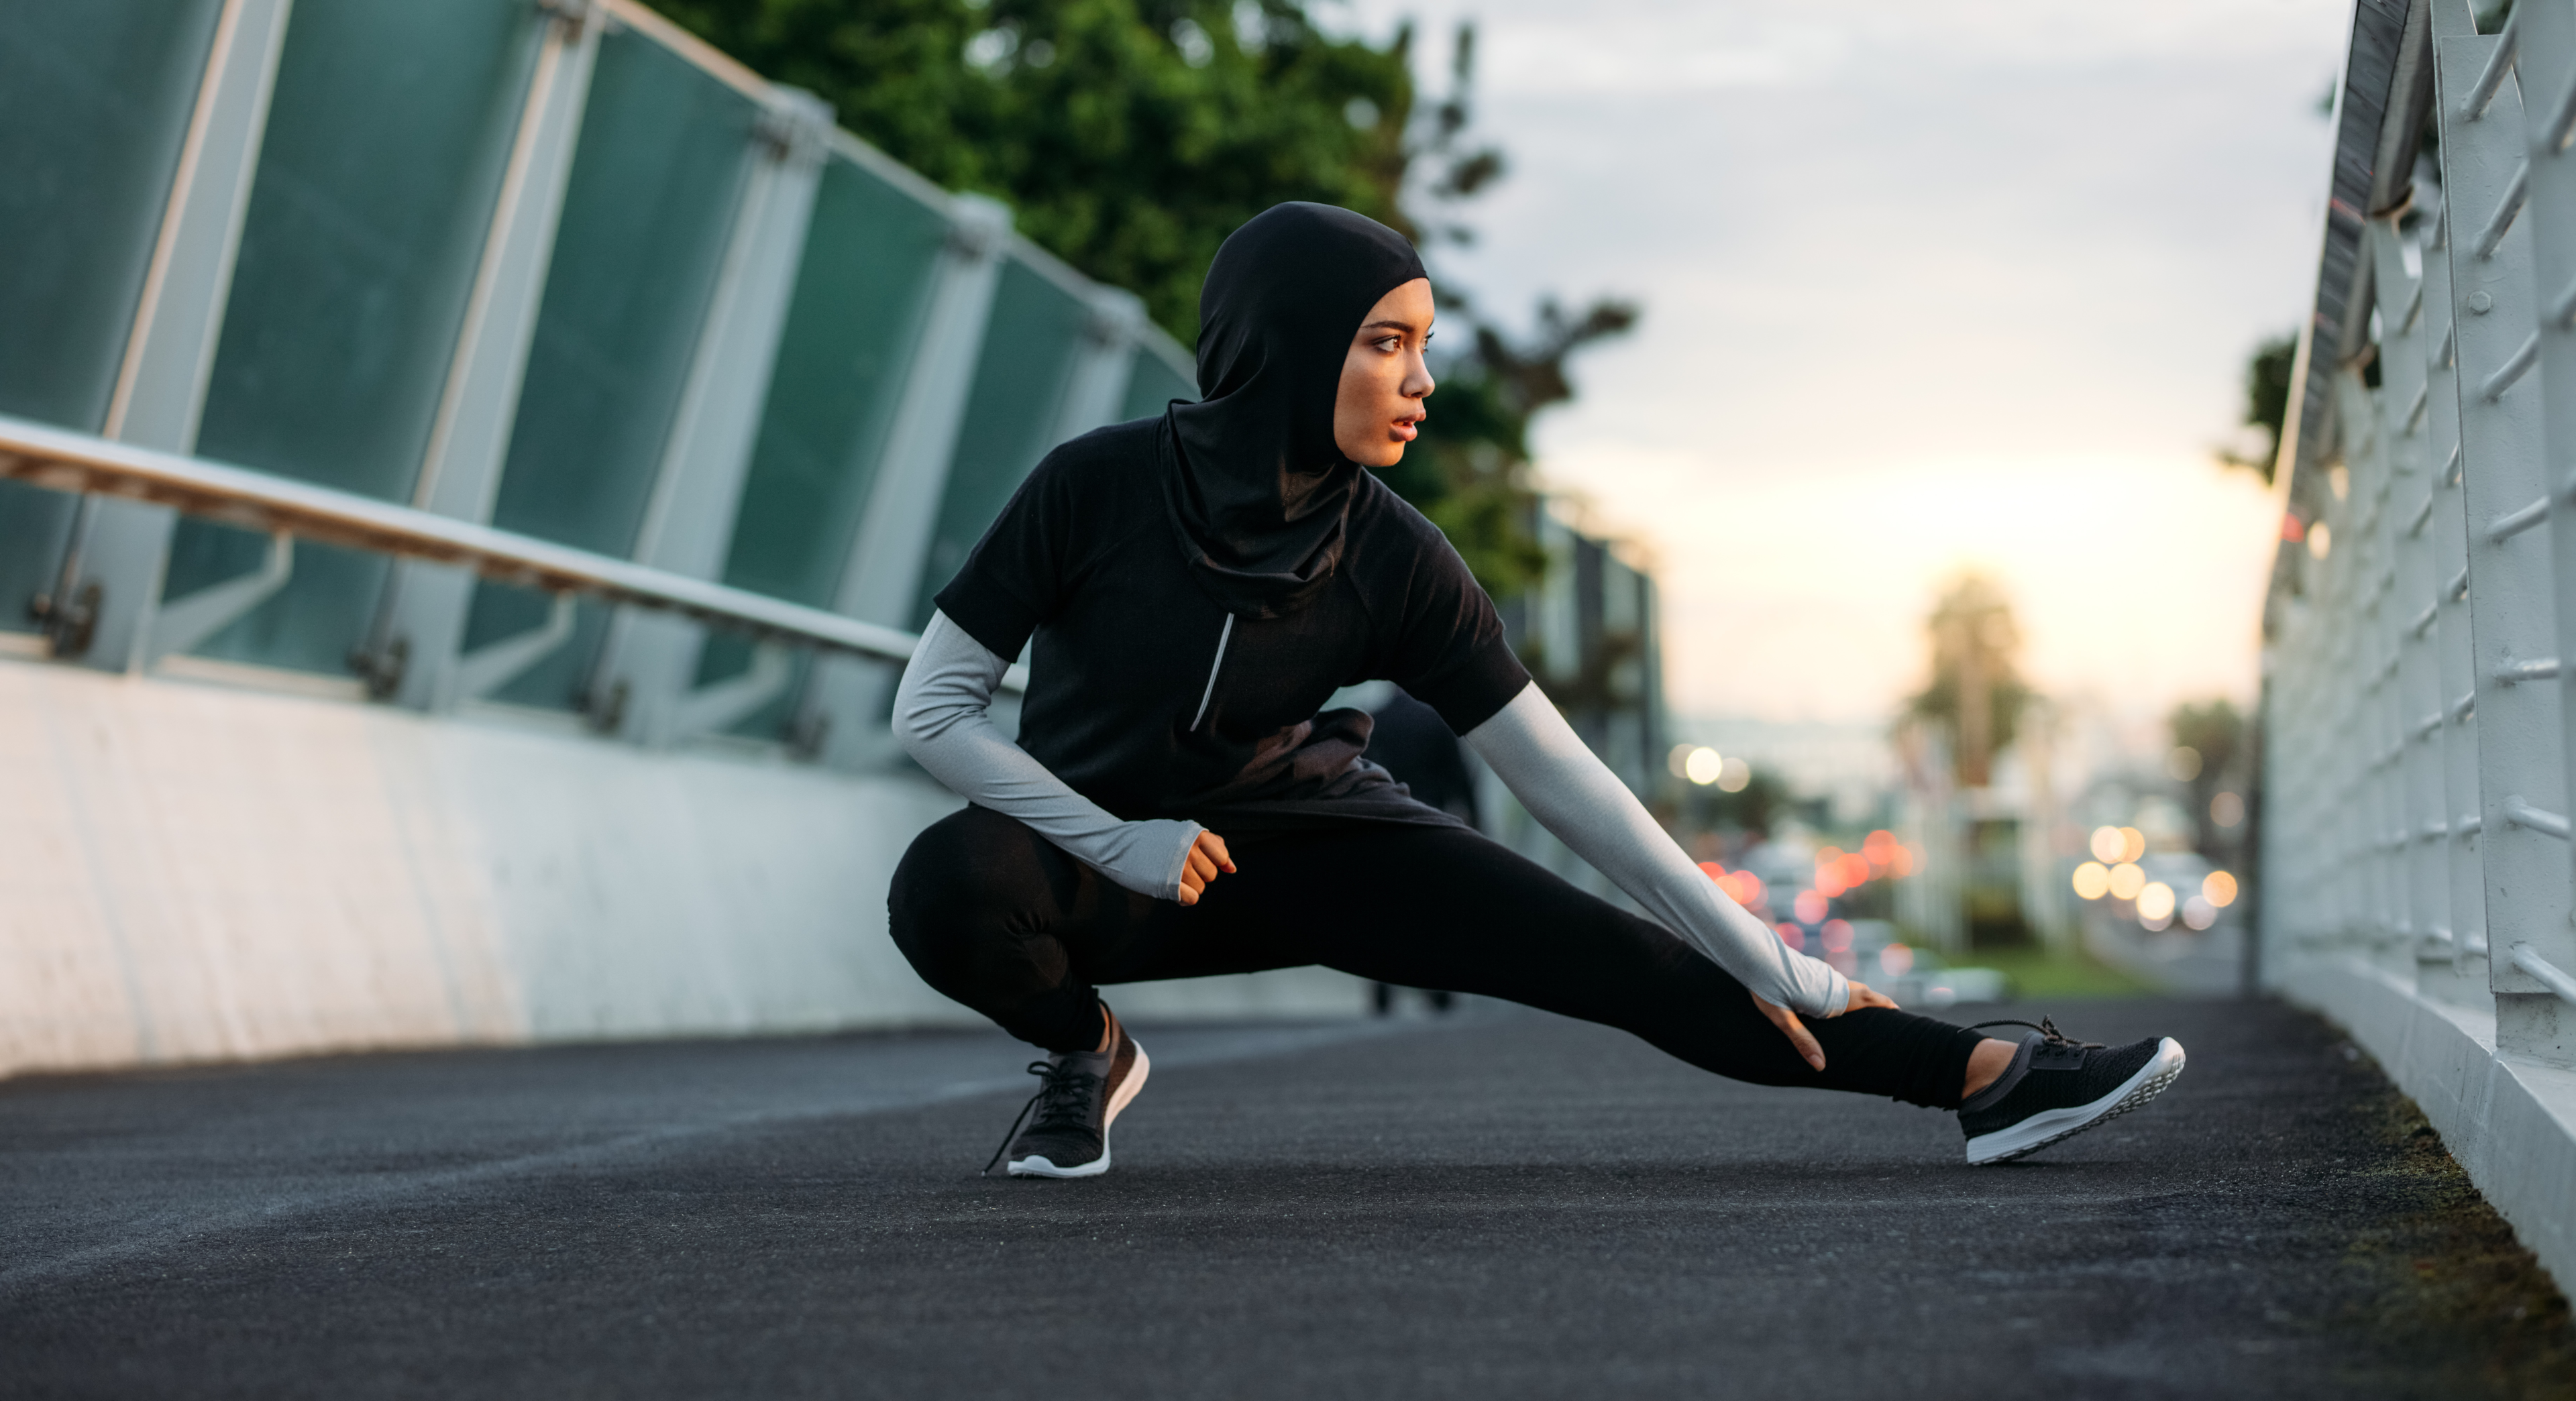 Athletic Wear with Hijab (Shutterstock)